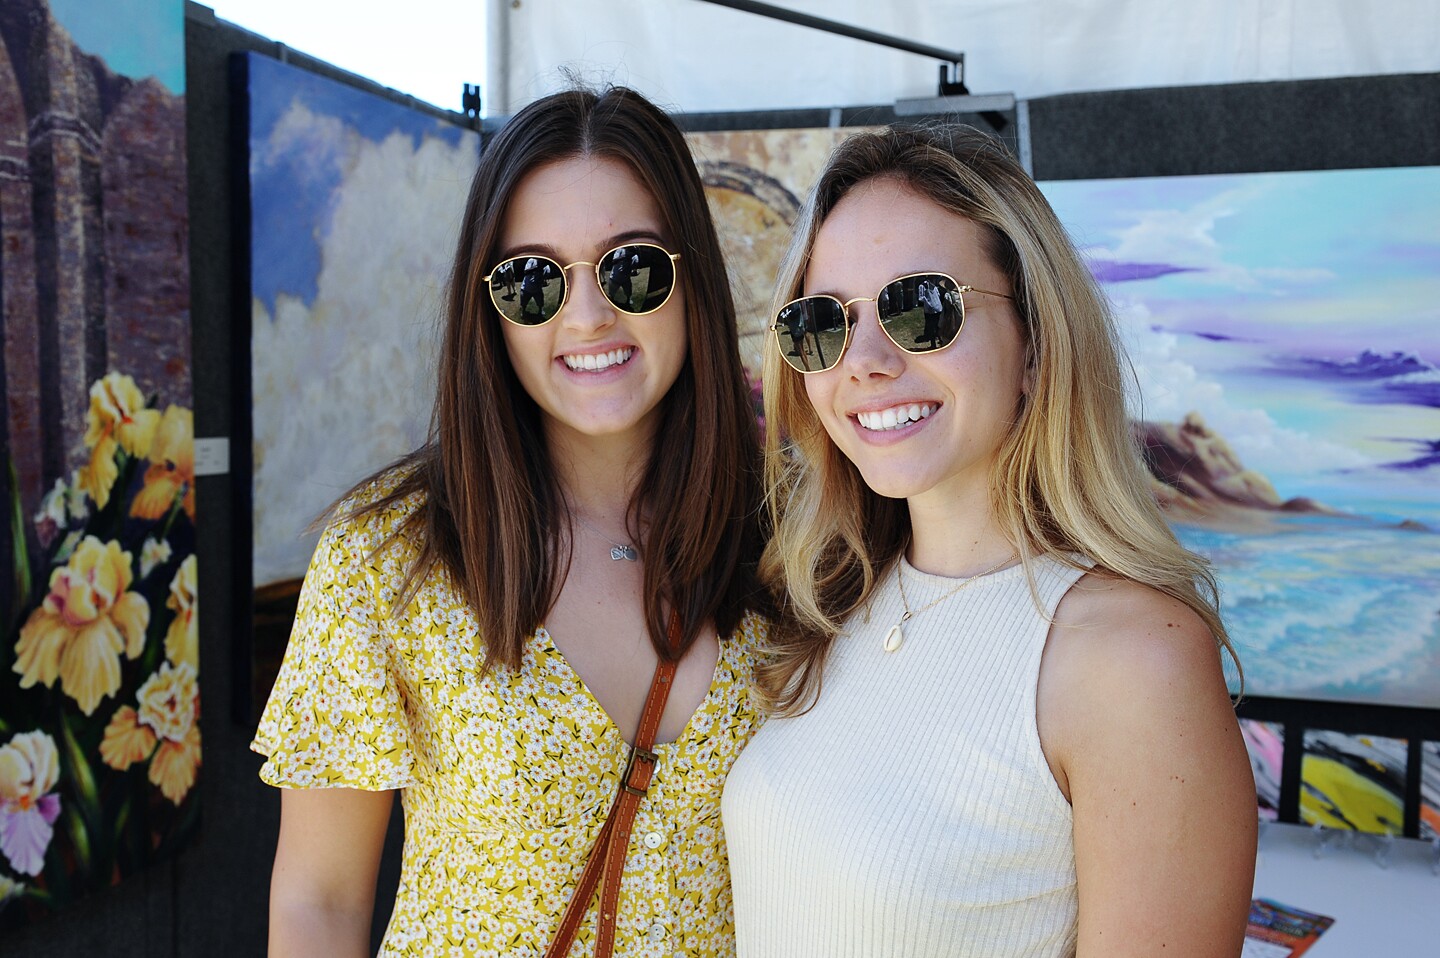 Liberty Station blossomed as the annual ArtWalk celebrated 14 years of "Connecting Creative Communities" on Saturday, August 10 and Sunday, August 11, 2019.